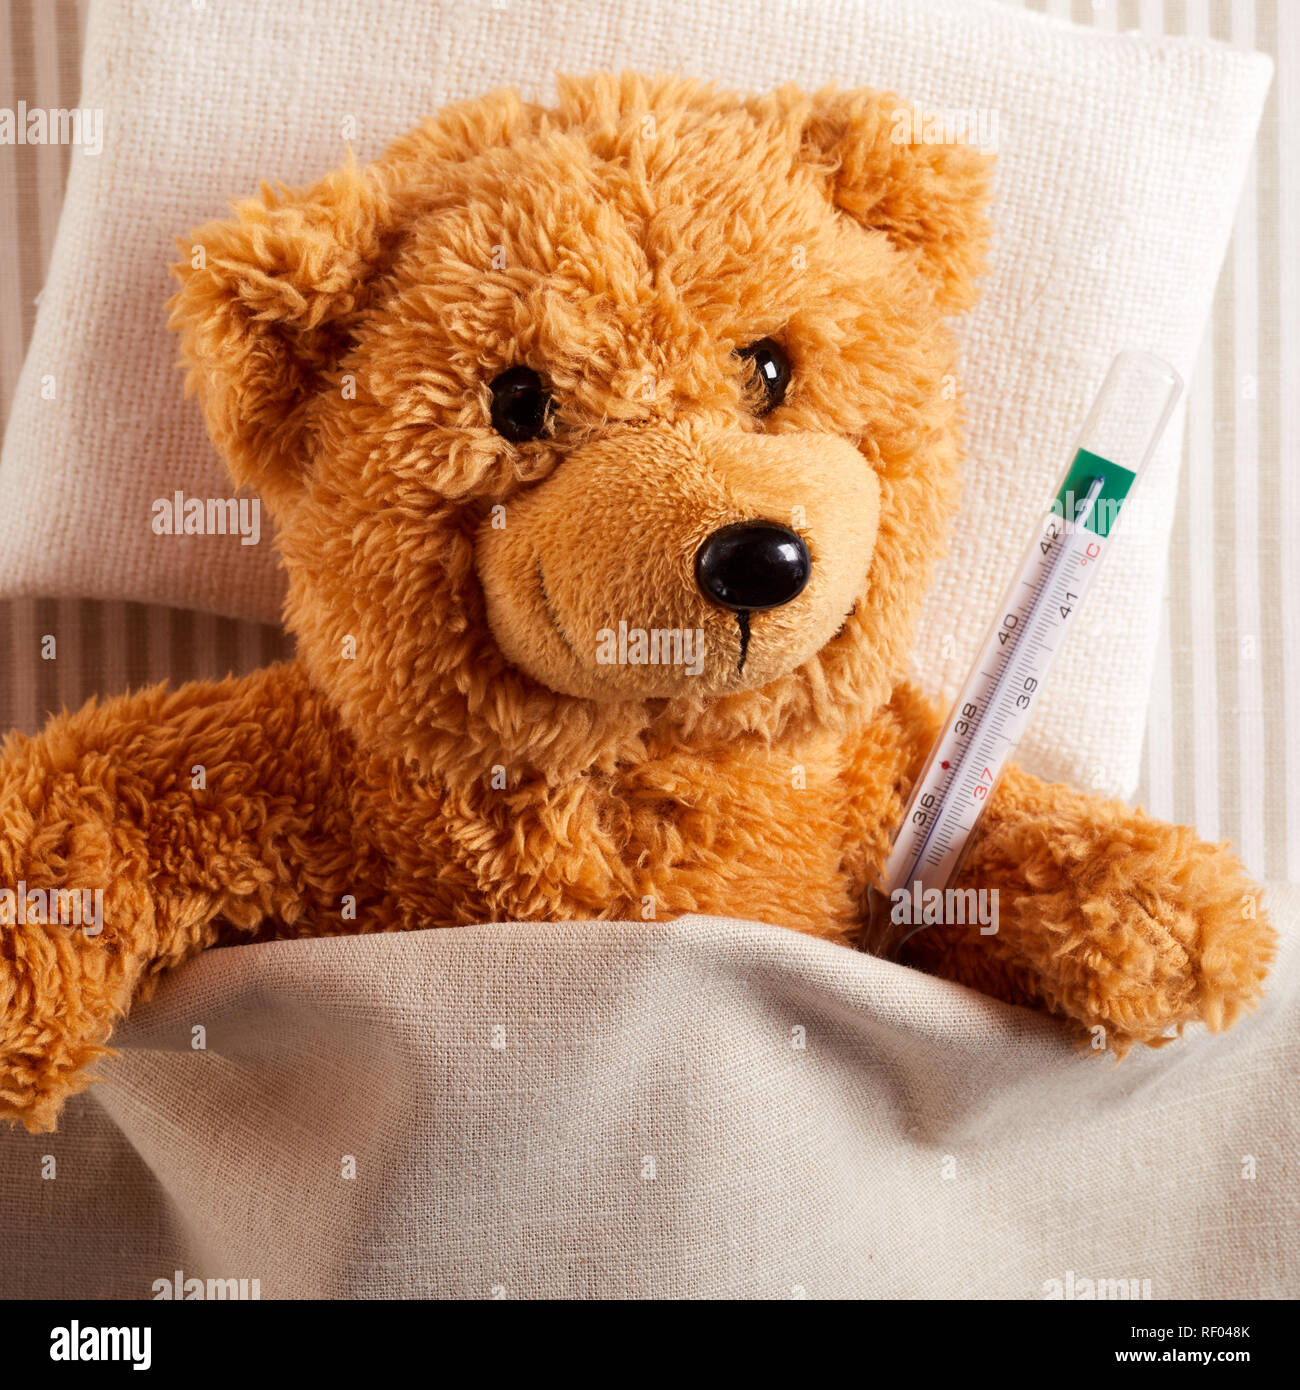 Health care concept of plush teddy bear lying in bed with thermometer Stock Photo